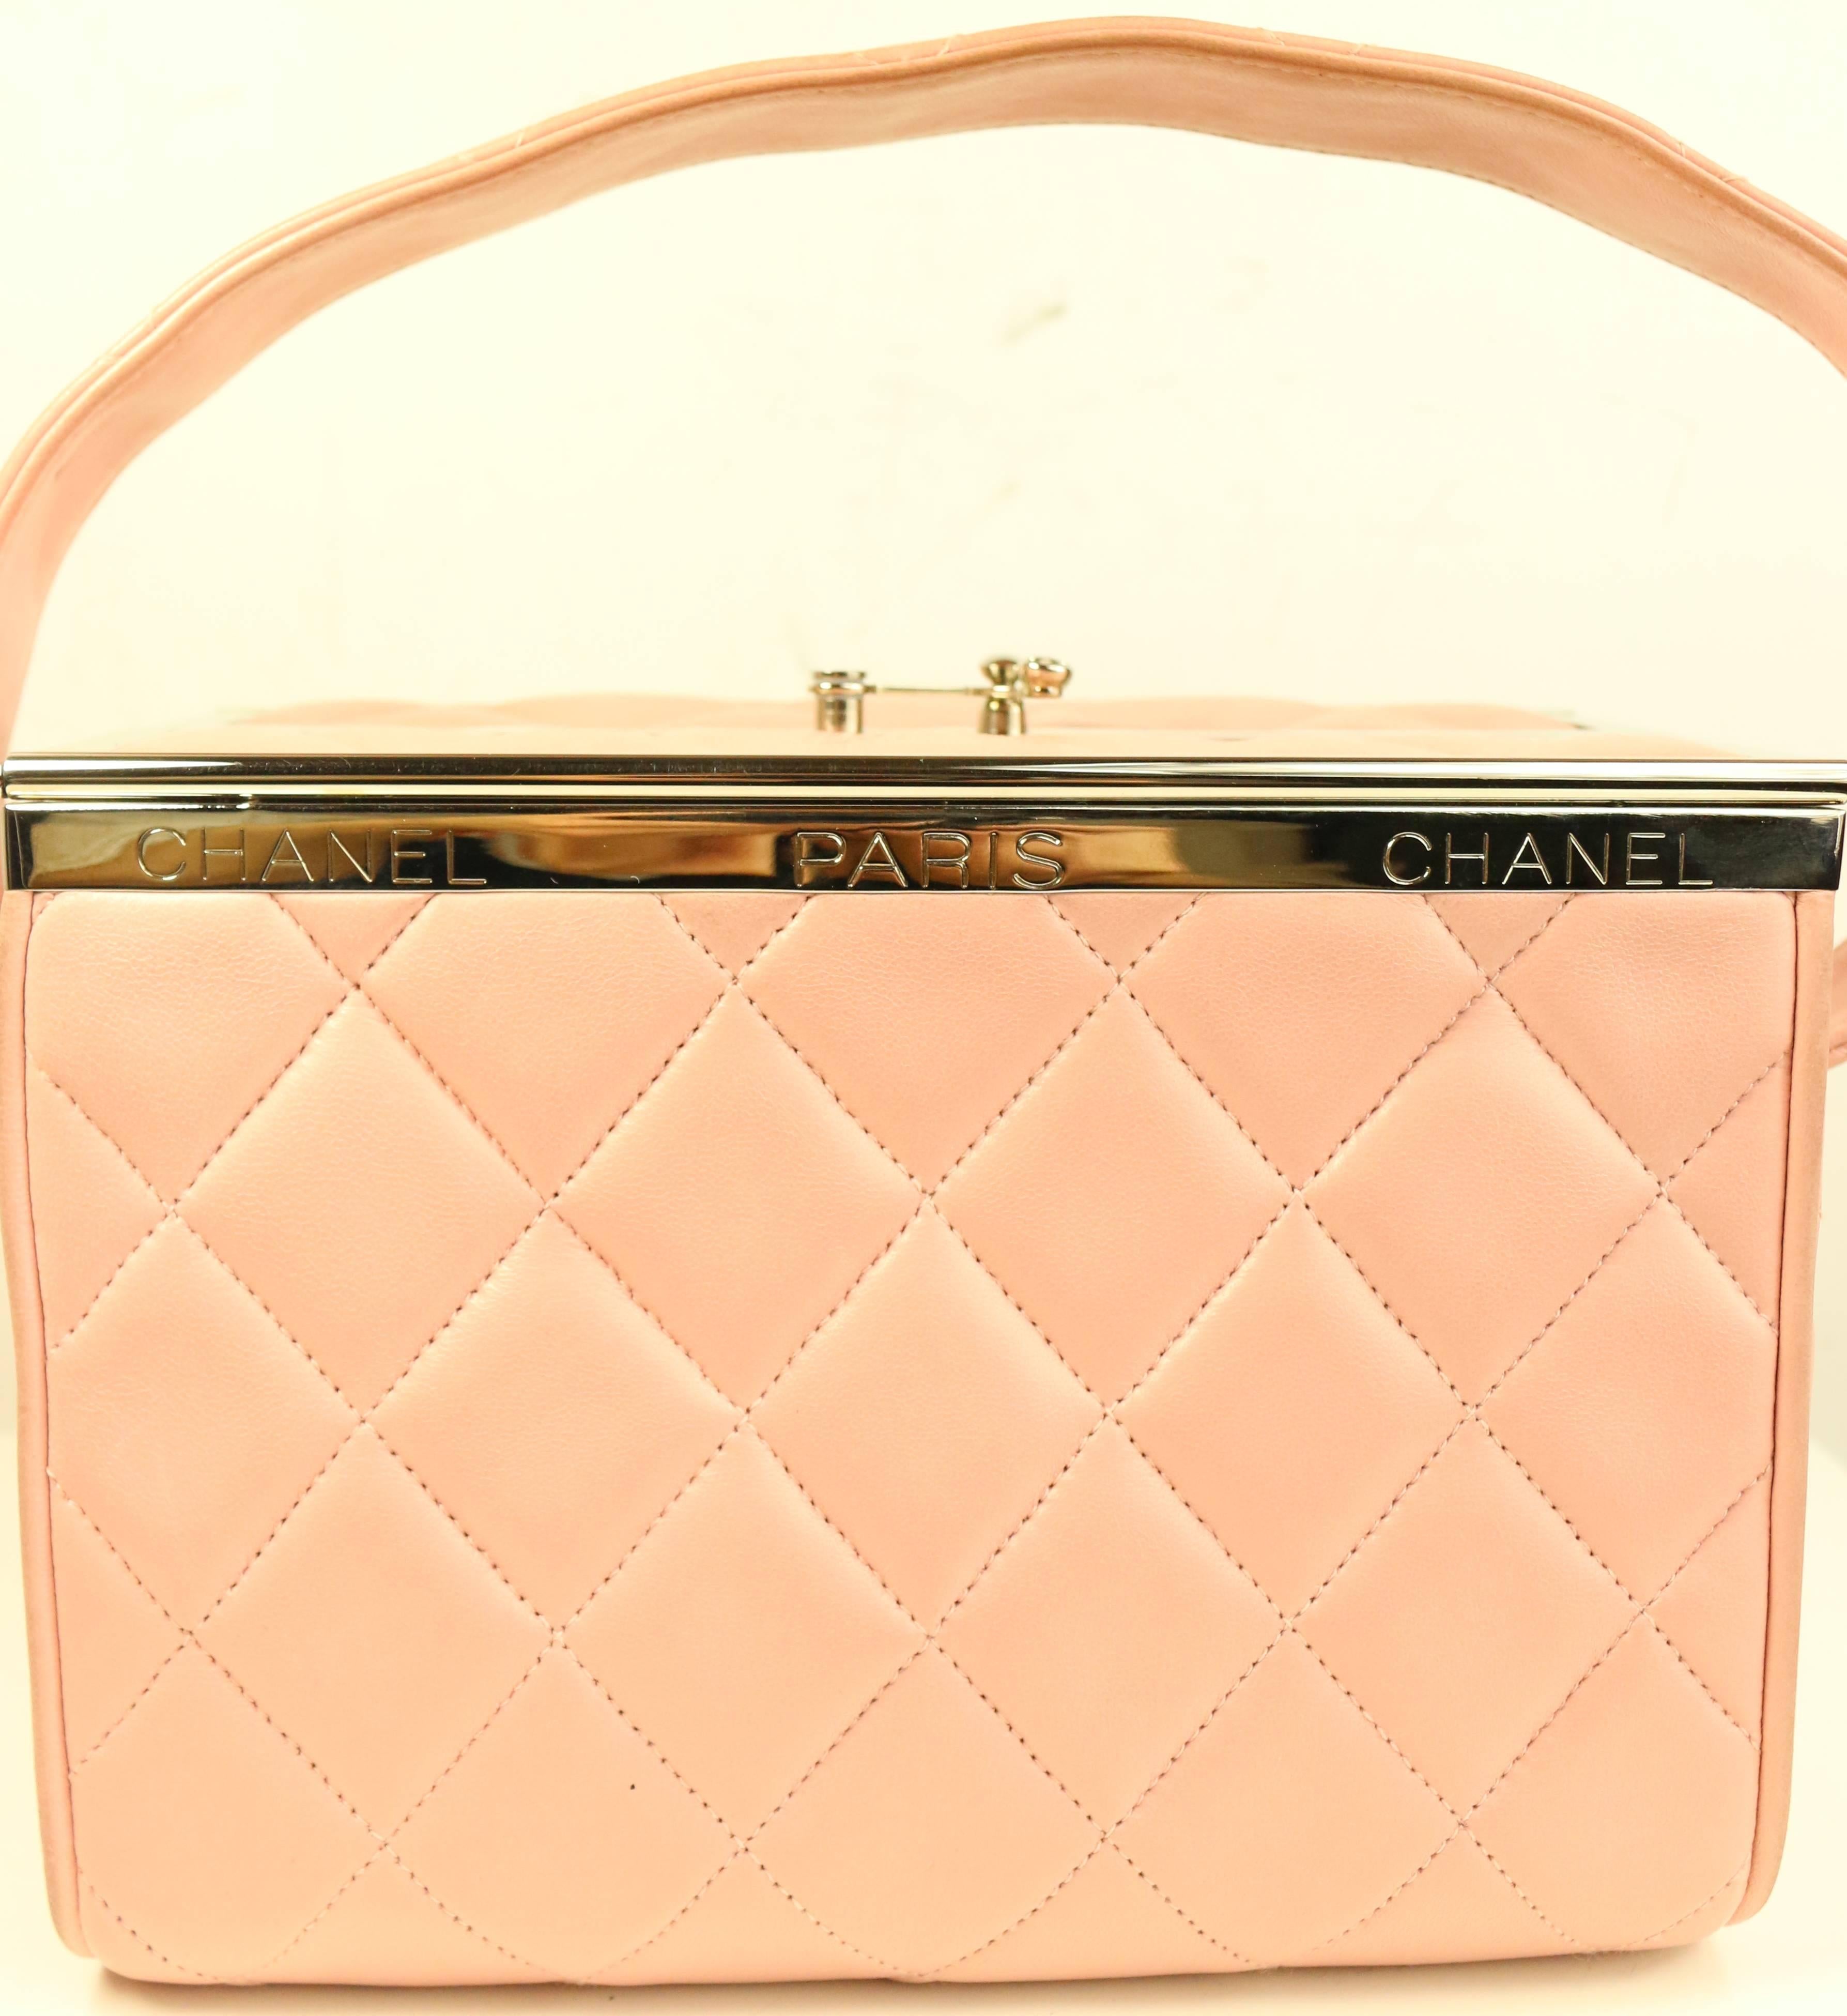 chanel quilted box bag